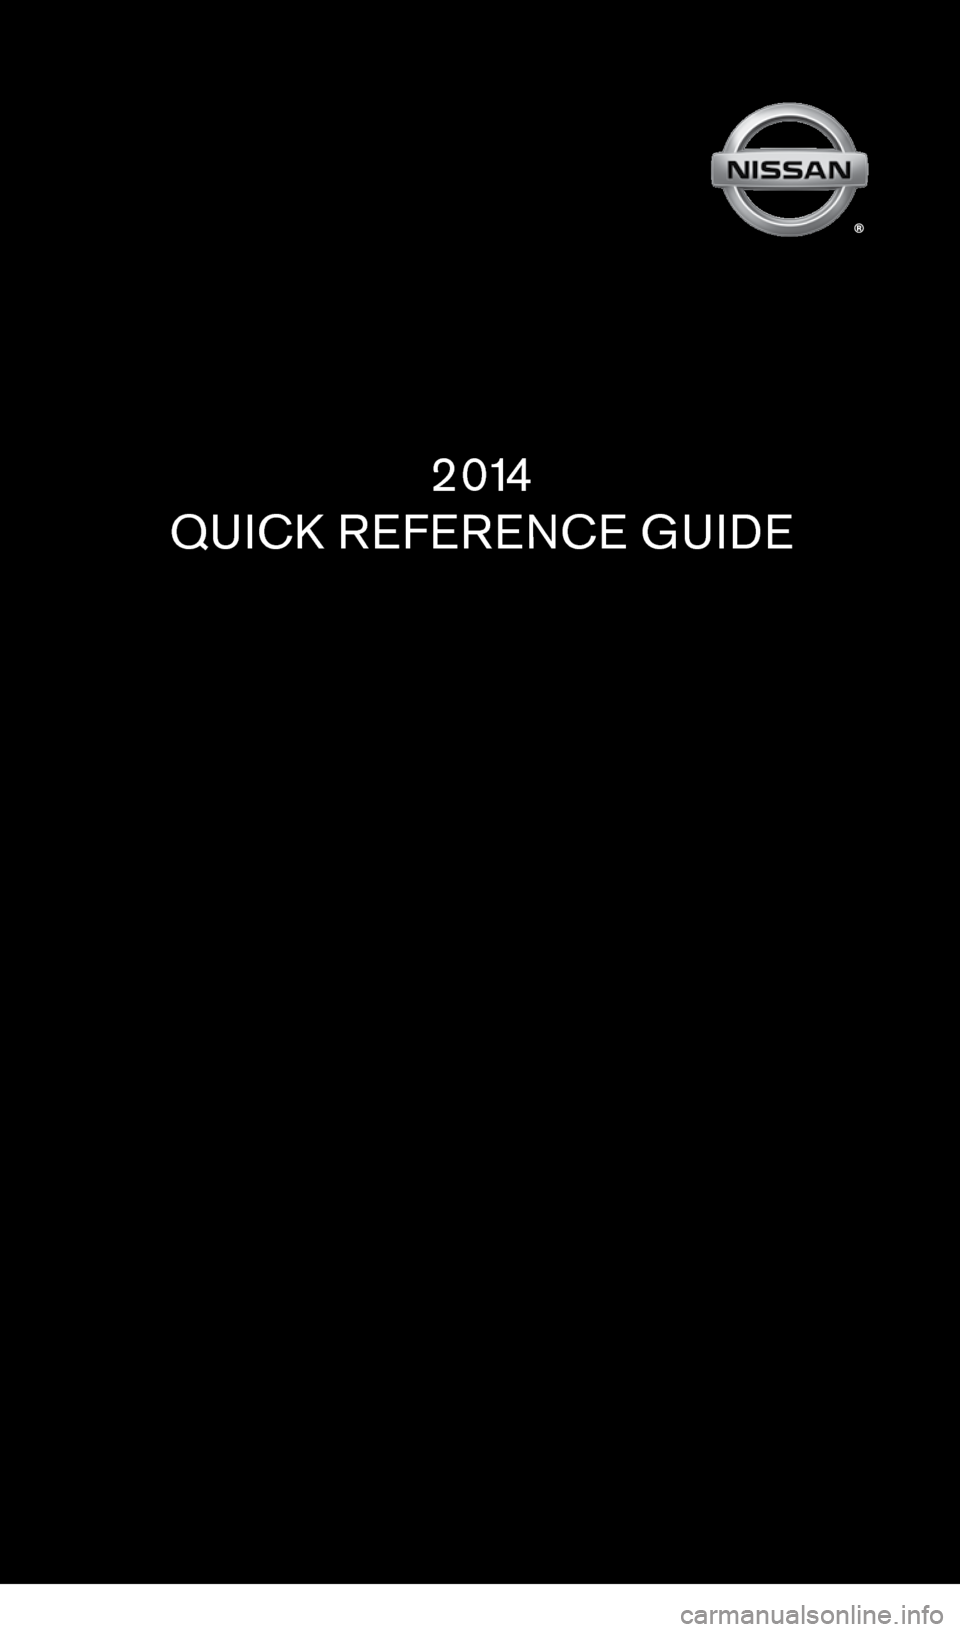 NISSAN GT-R 2014 R35 Quick Reference Guide 2 0 14
QUICK REFERENCE GUIDE
1276458_14a_GTR_QRG_Cover_113012.indd   311/30/12   1:44 PM 